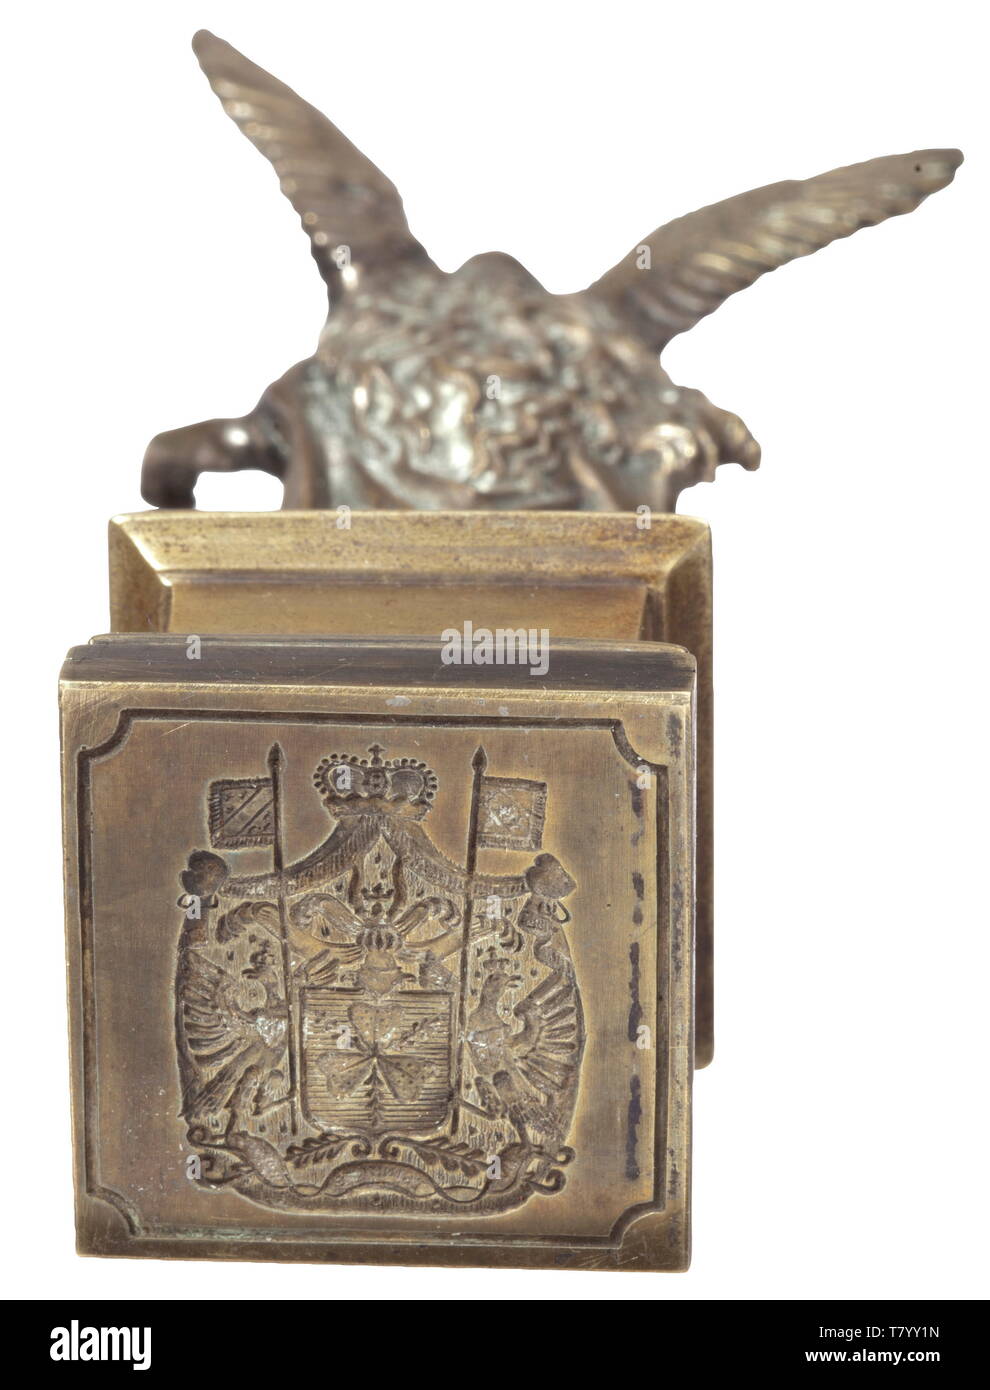 Otto Prince of Bismarck (1815 - 1898) - his personal seal. Brass with  vestiges of former gilding, the rectangular seal surface with a carved Bismarck  coat of arms in the style after